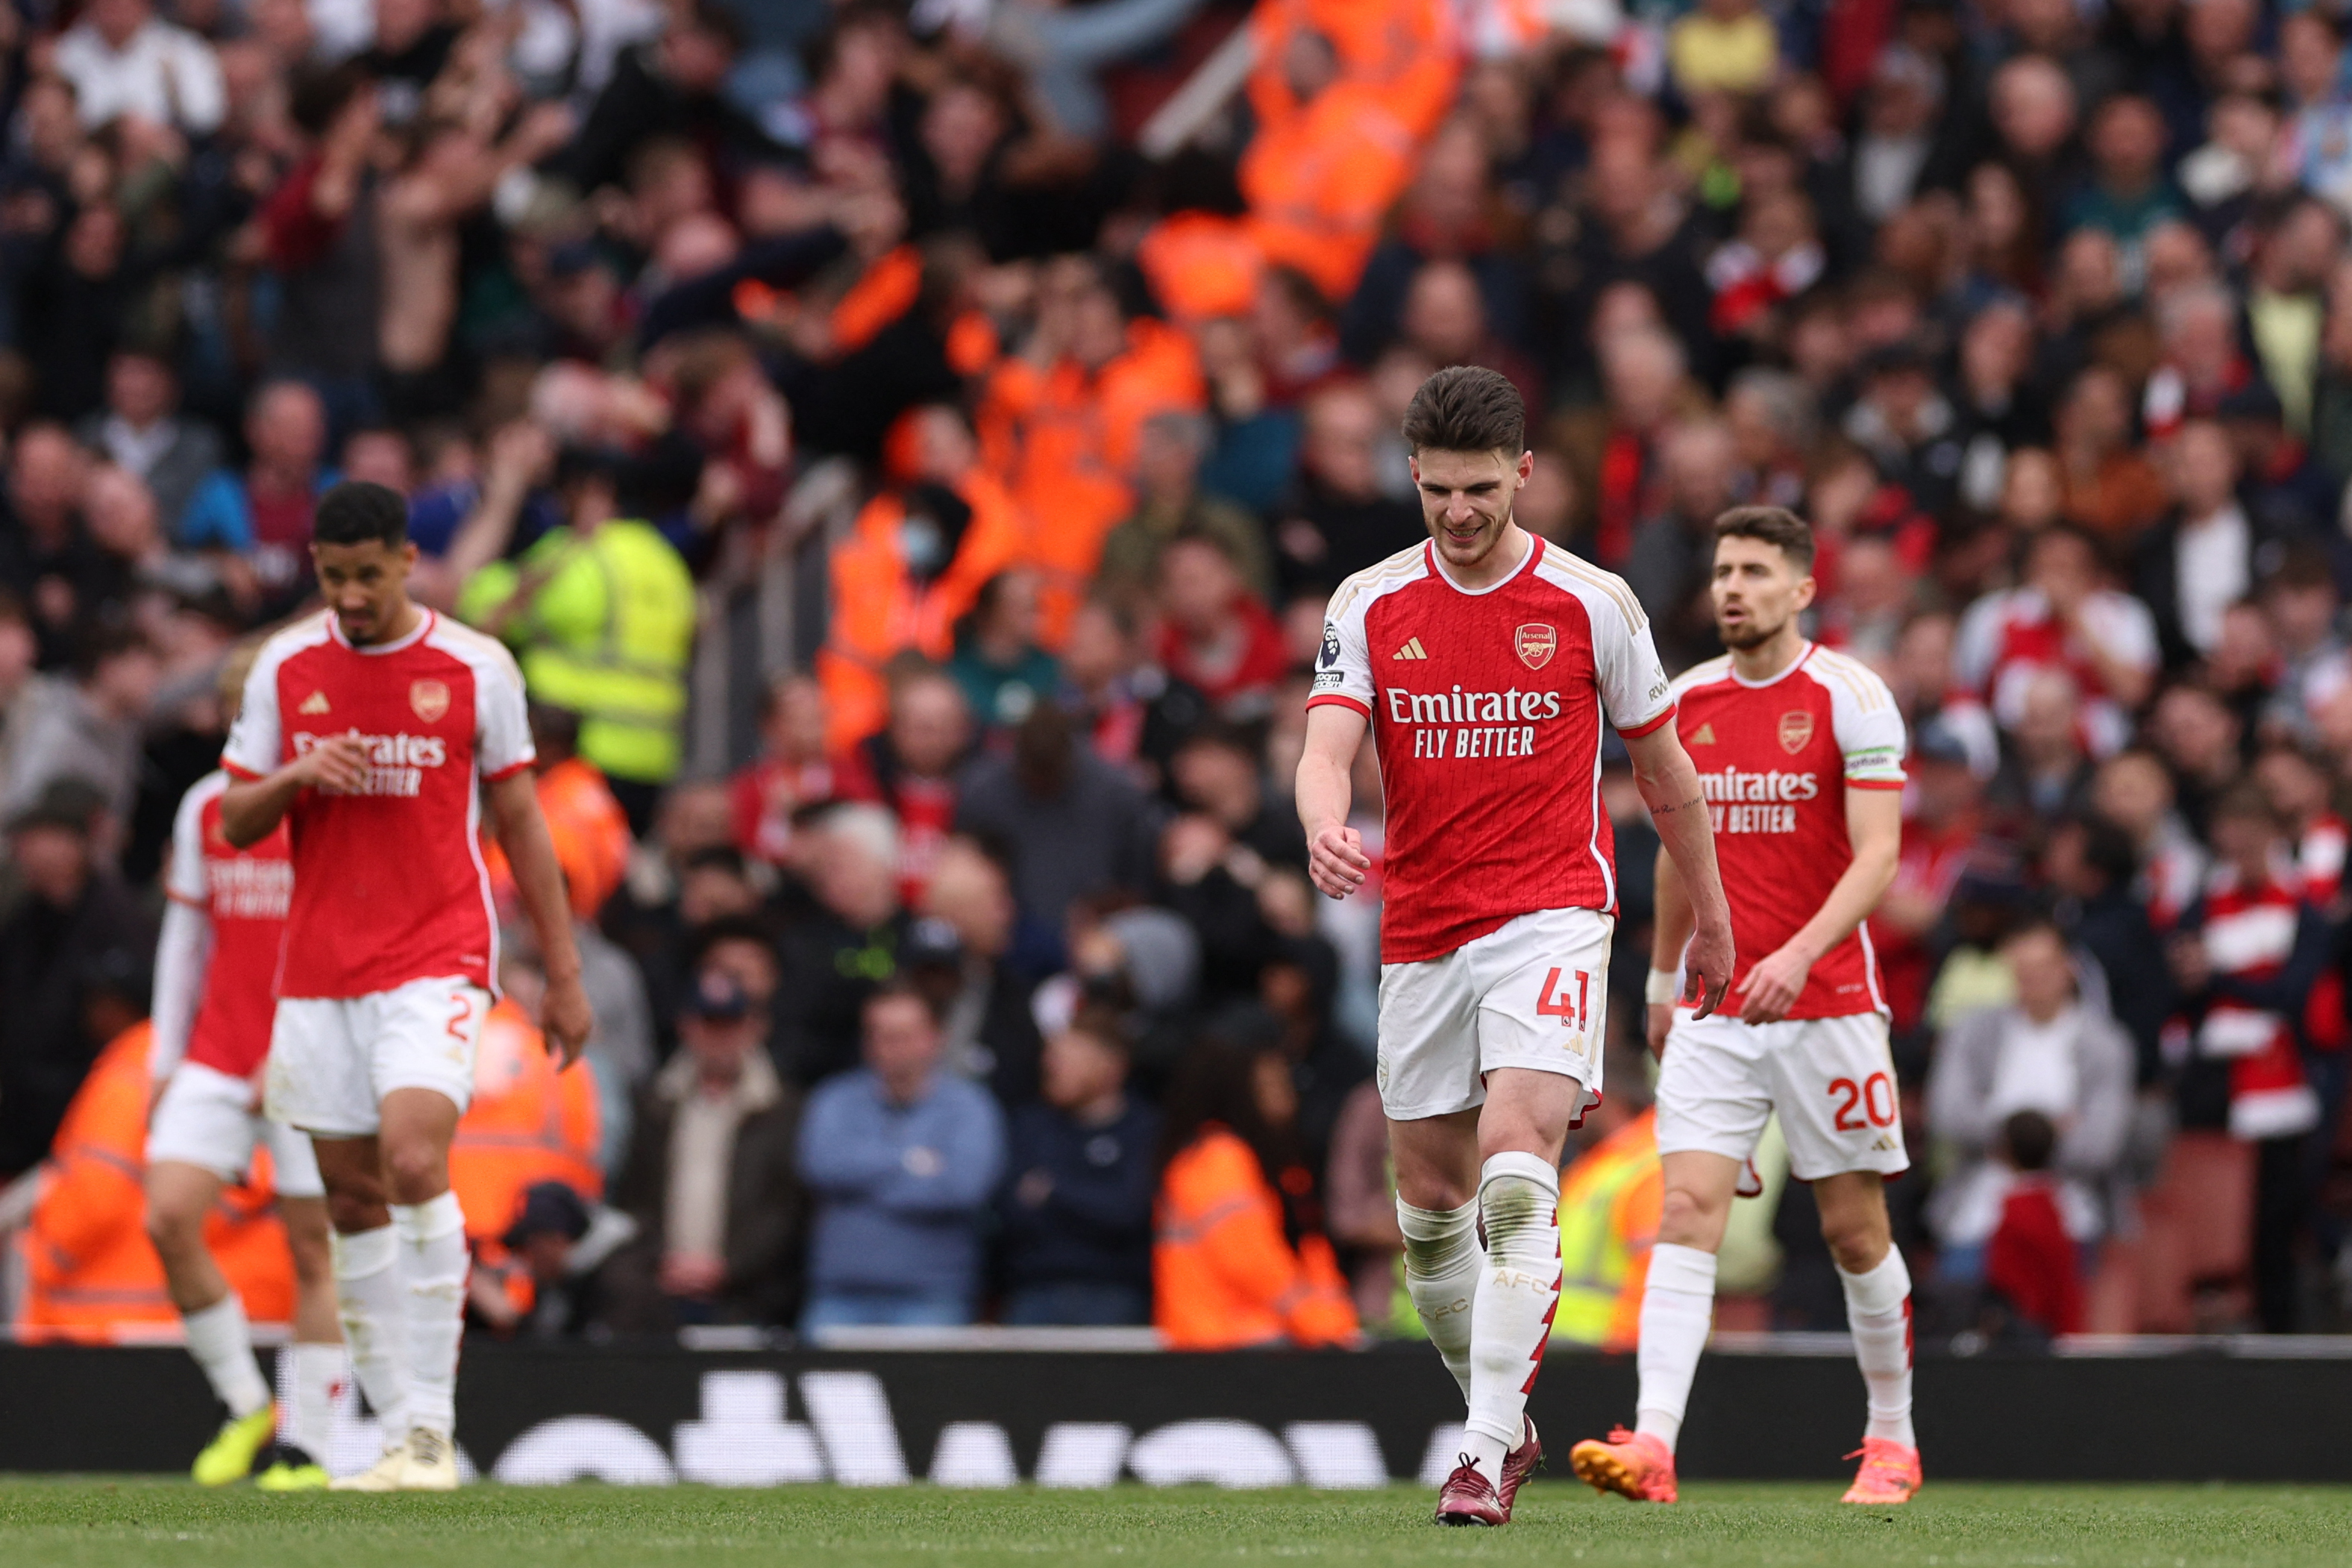 Arsenal must win to move on from their disappointment